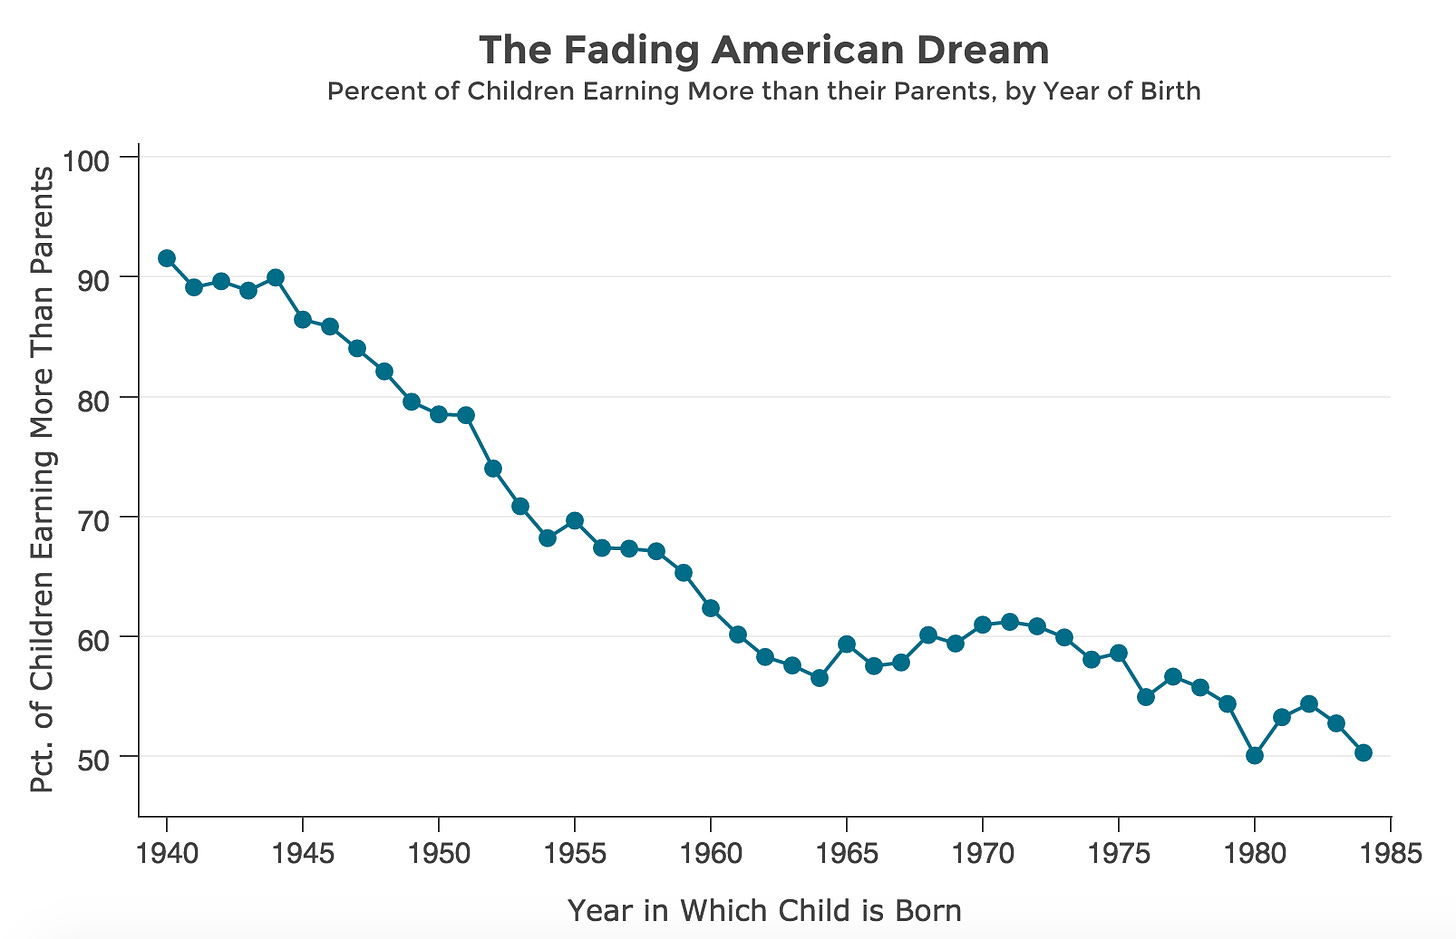 The Fading American Dream - Stanford Center on Poverty and Inequality